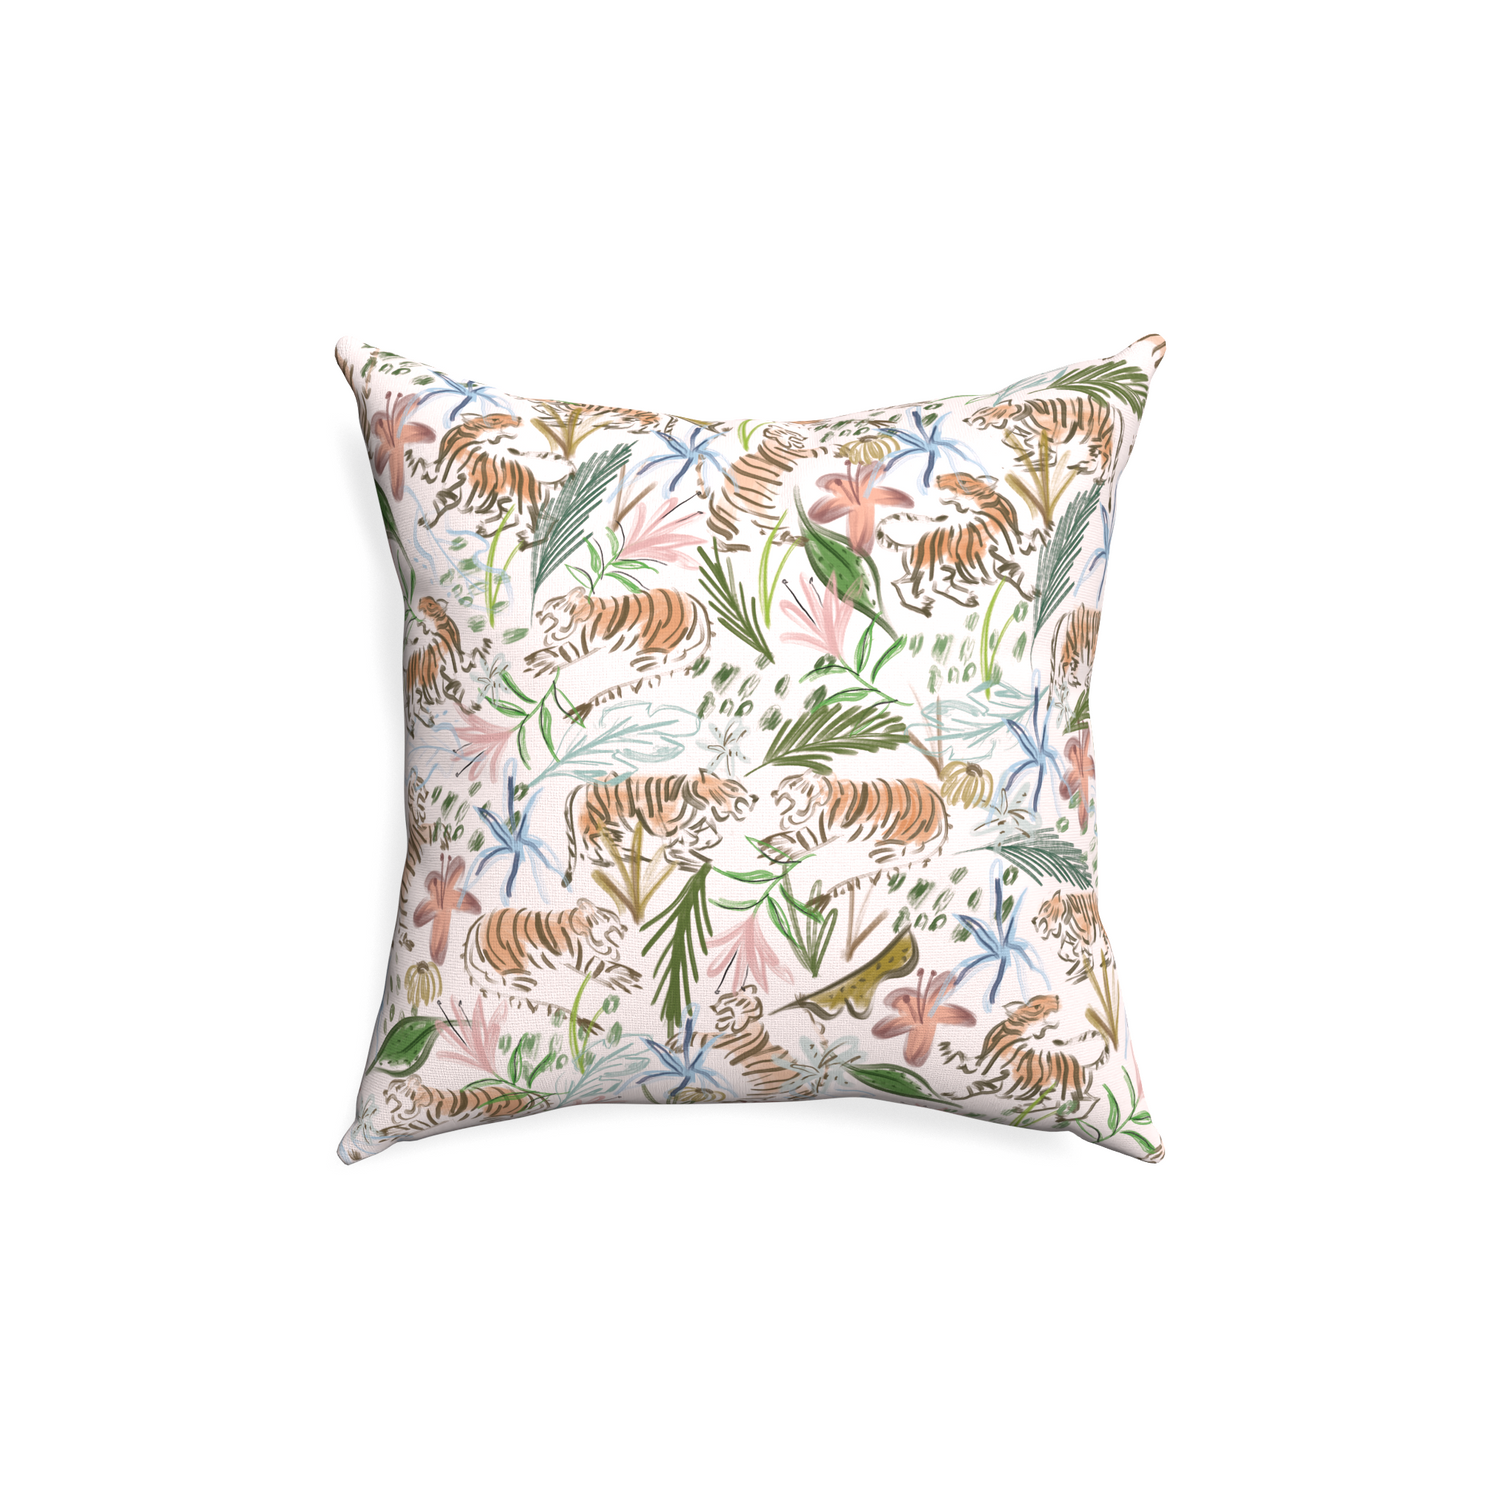 18-square frida pink custom pink chinoiserie tigerpillow with none on white background